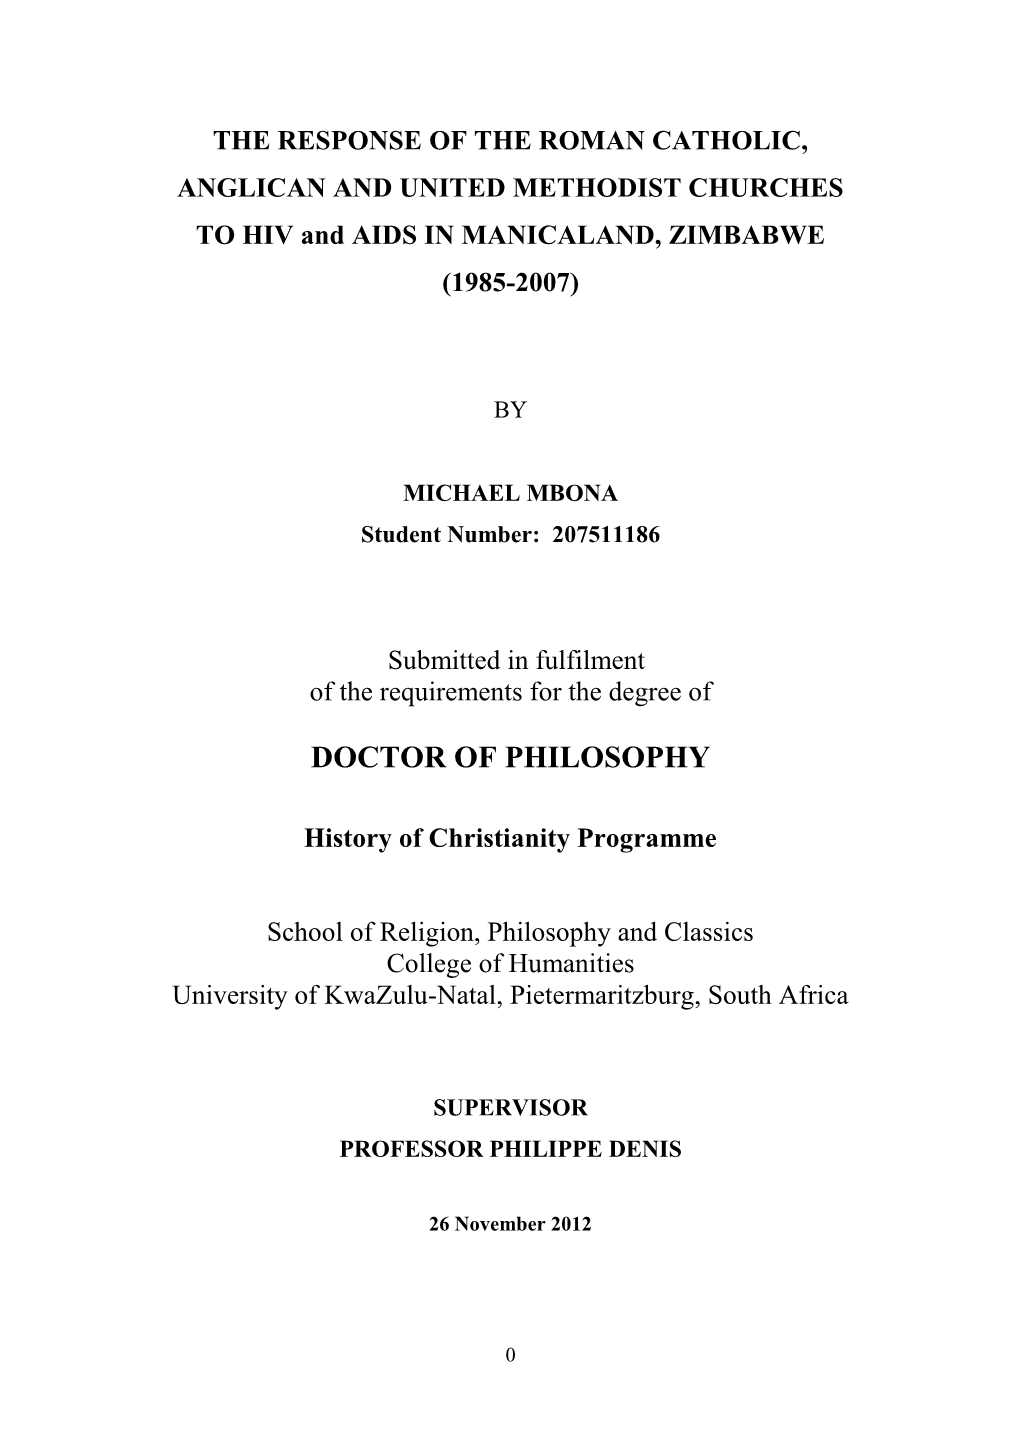 THE RESPONSE of the ROMAN CATHOLIC, ANGLICAN and UNITED METHODIST CHURCHES to HIV and AIDS in MANICALAND, ZIMBABWE (1985-2007)